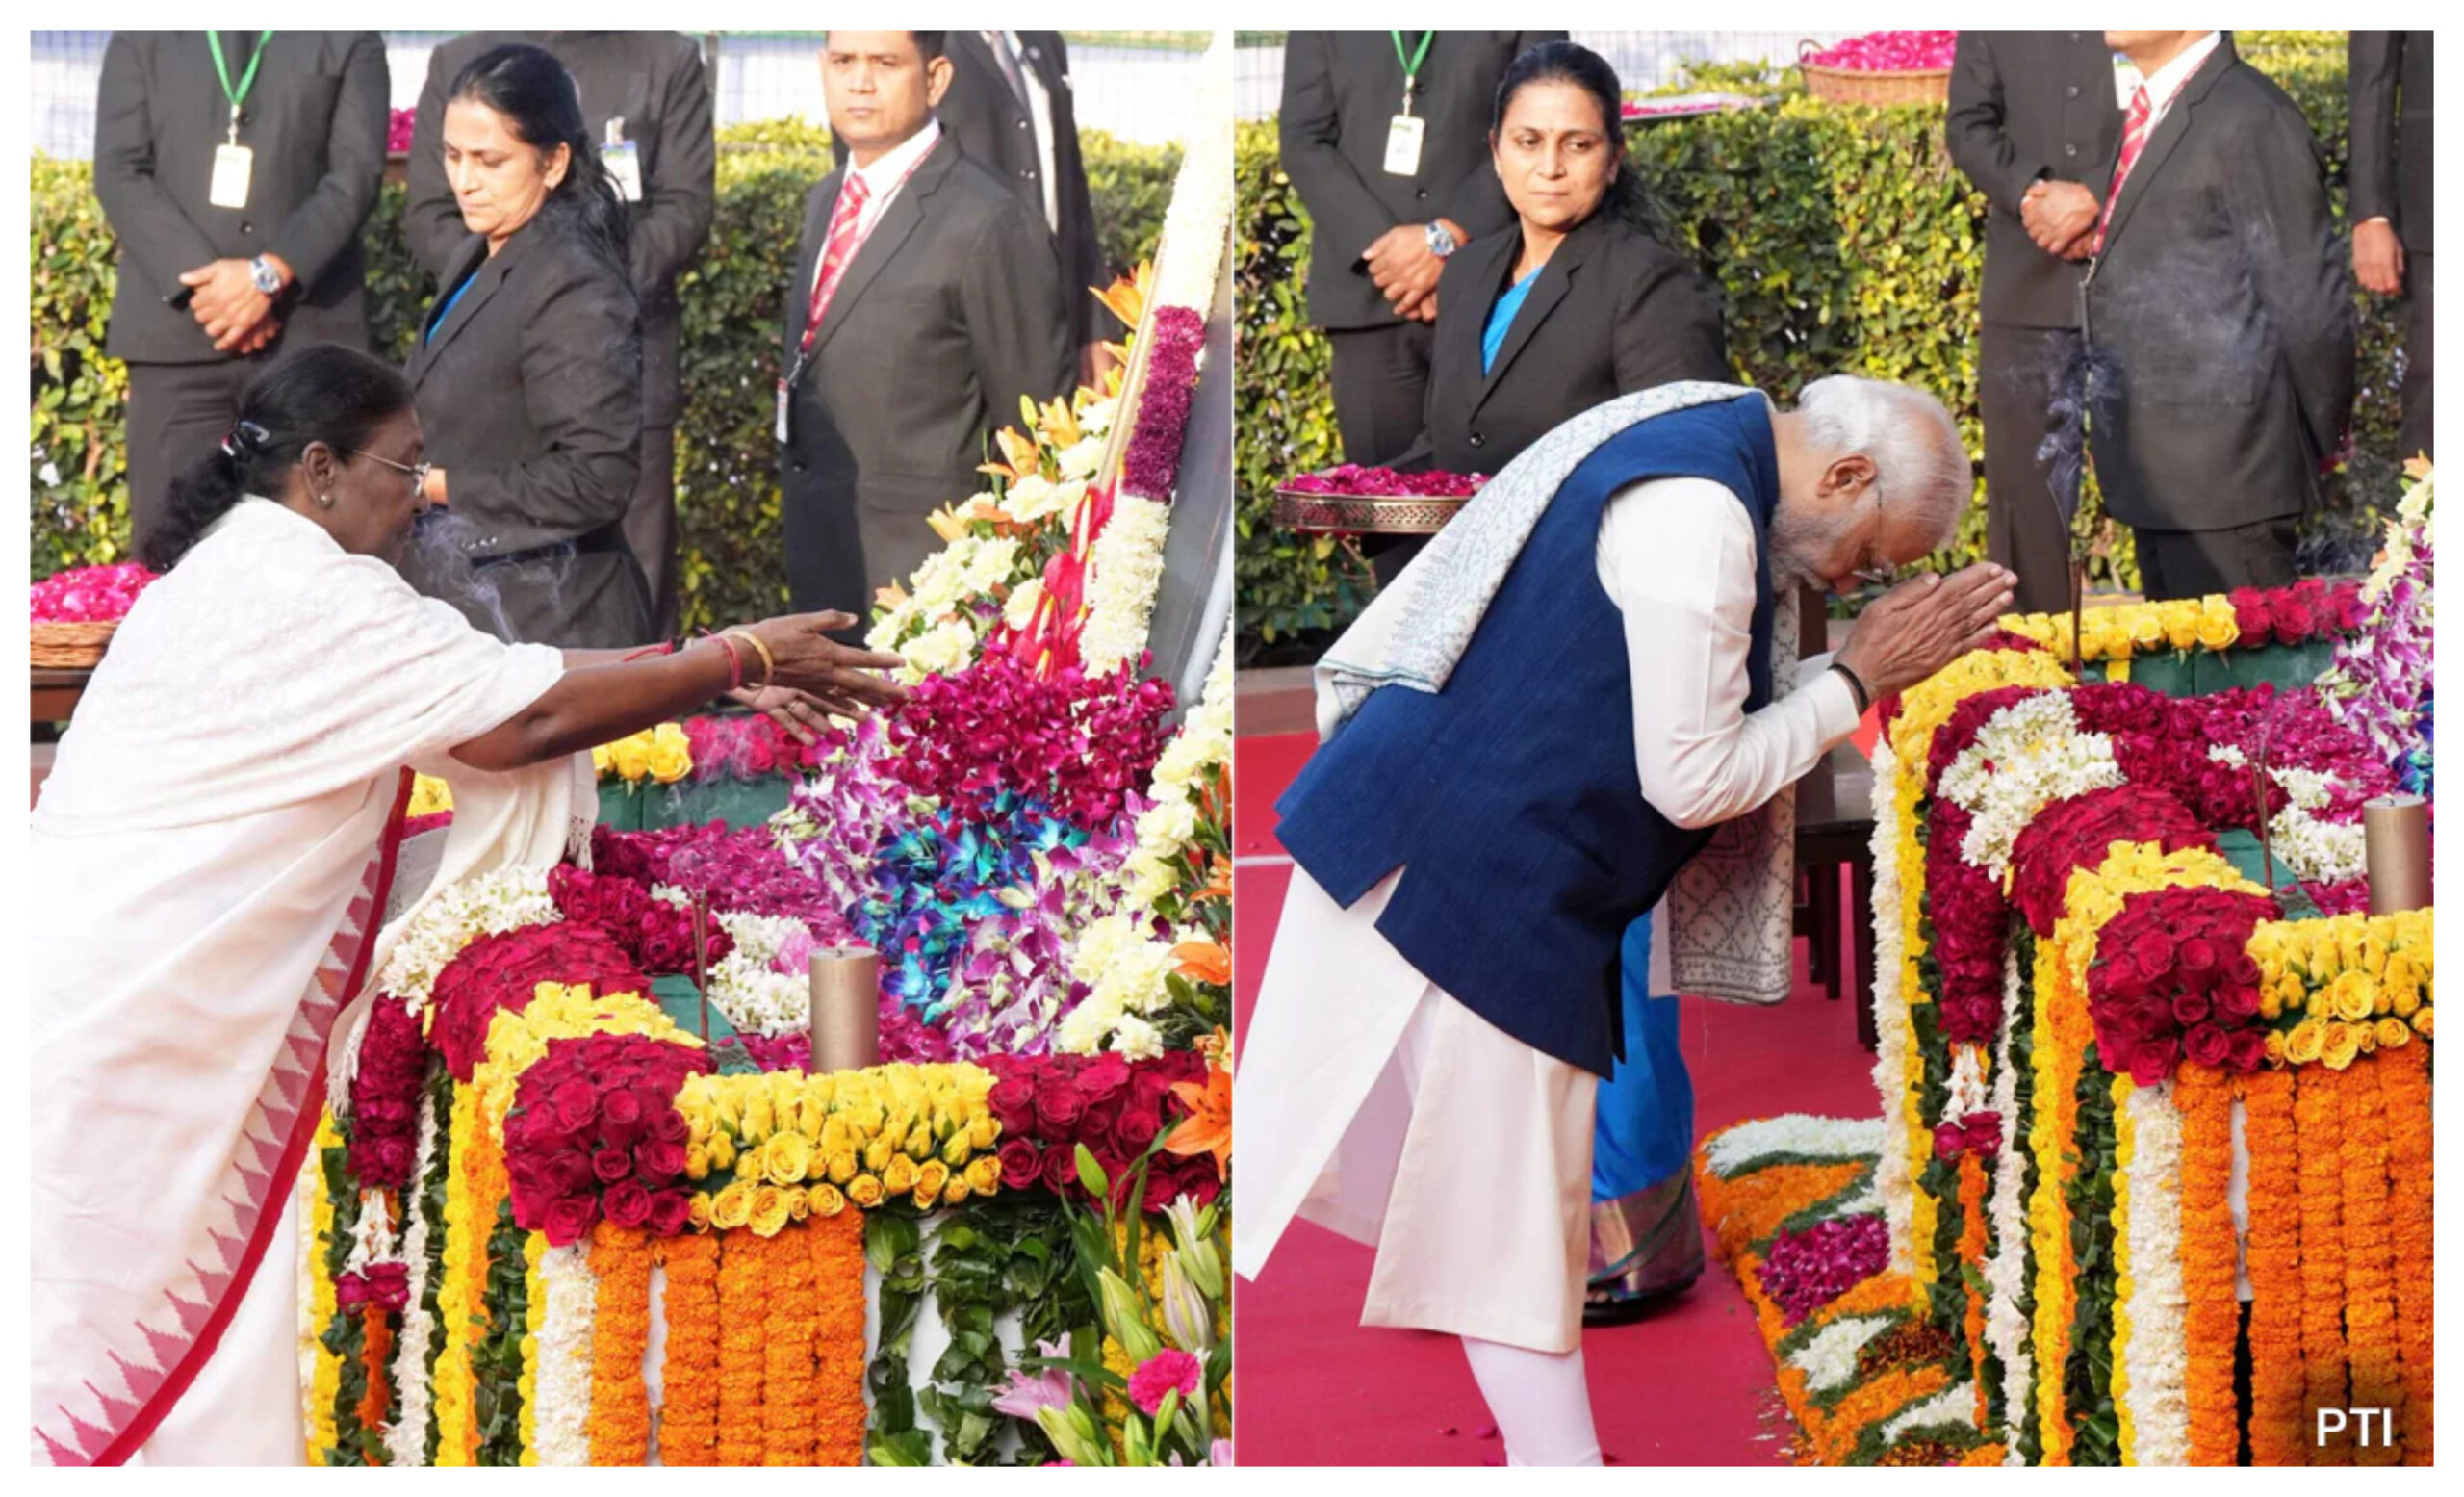 Ambedkar Jayanti: PM Modi along with the President and Vice President paid floral tributes to the creator of the Constitution, dr bhimrao ambedkar, ambedkar jayanti, pm modi, draupadi murmu, jp nadda, bhimrao-ambedkar-jayanti in hindi news